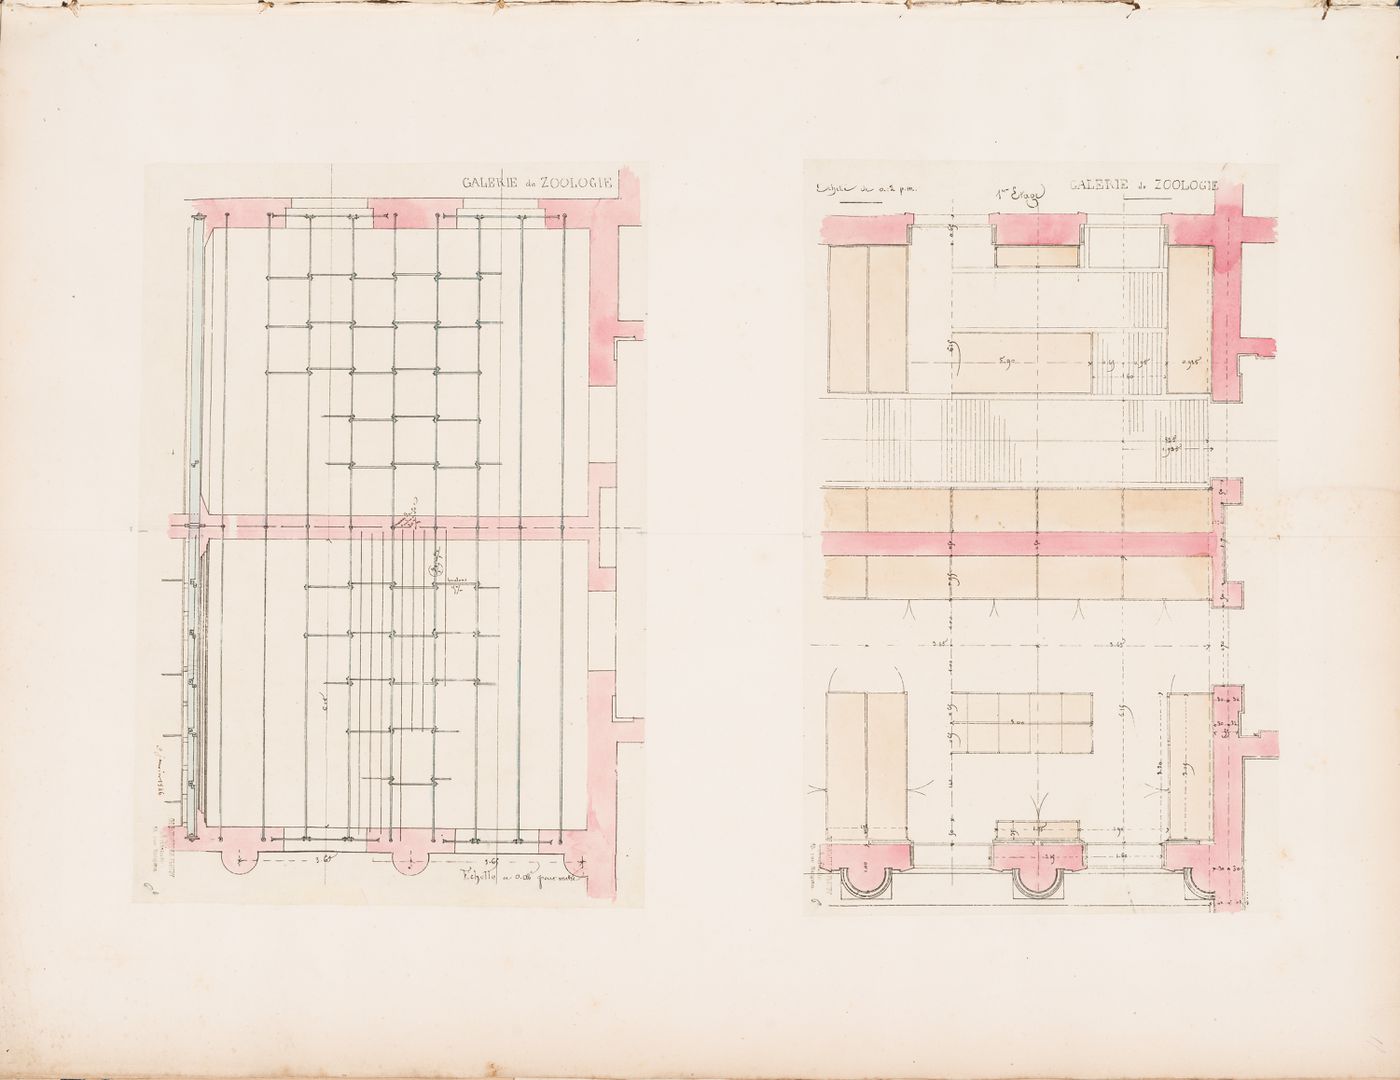 Project for a Galerie de zoologie, 1846: Partial first floor plan for the main wing and partial plan for the floor plan structure